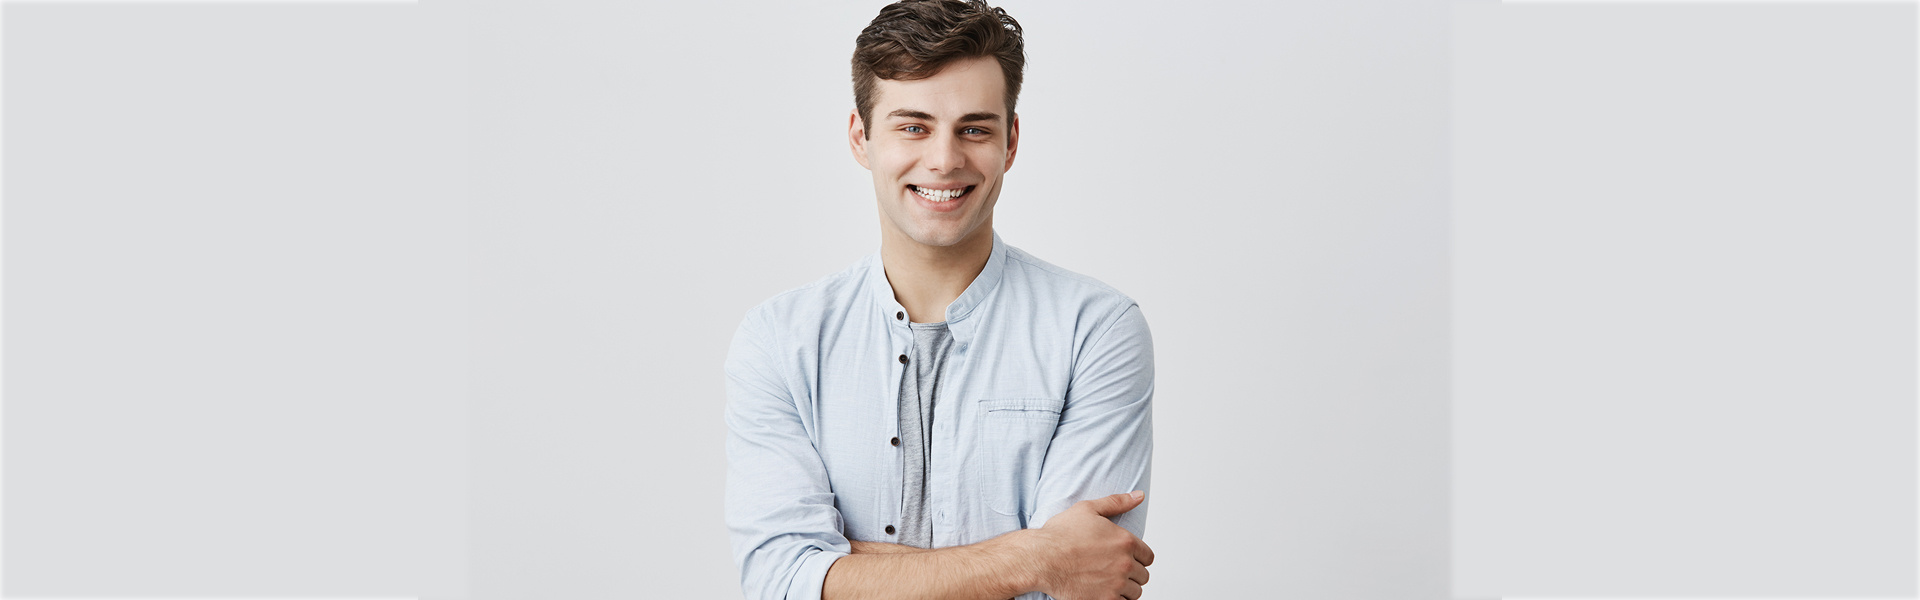 People and lifestyle concept. Portrait of attractive young caucasian male in good mood, wearing blue long sleeved shirt smiling cheerfully showing his perfect white teeth, happy with positive news, keeping his arms folded.